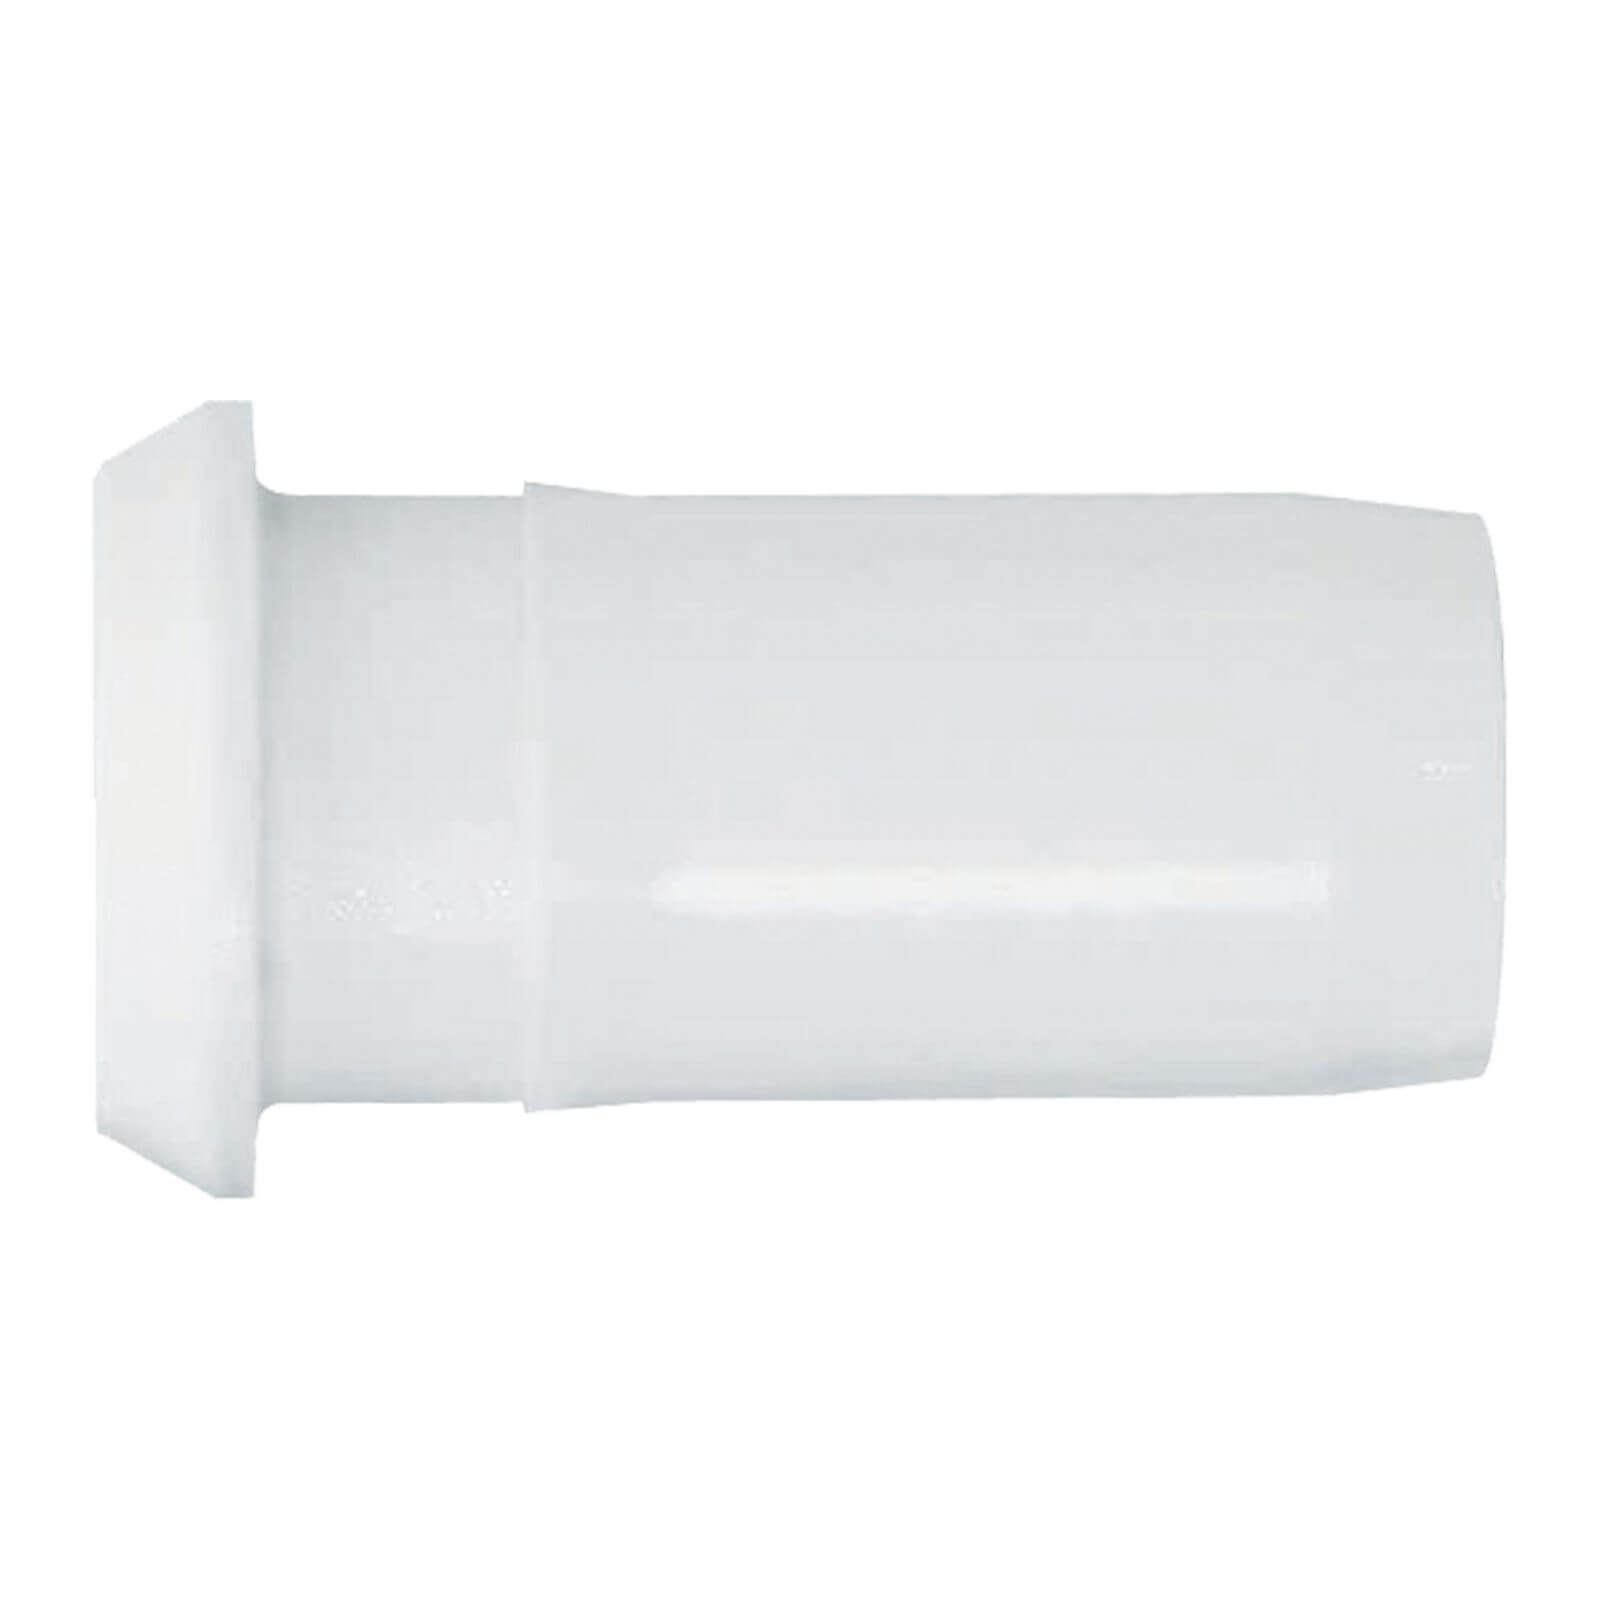 Photo of Jg Speedfit Pipe Inserts - 22mm - 25 Pack